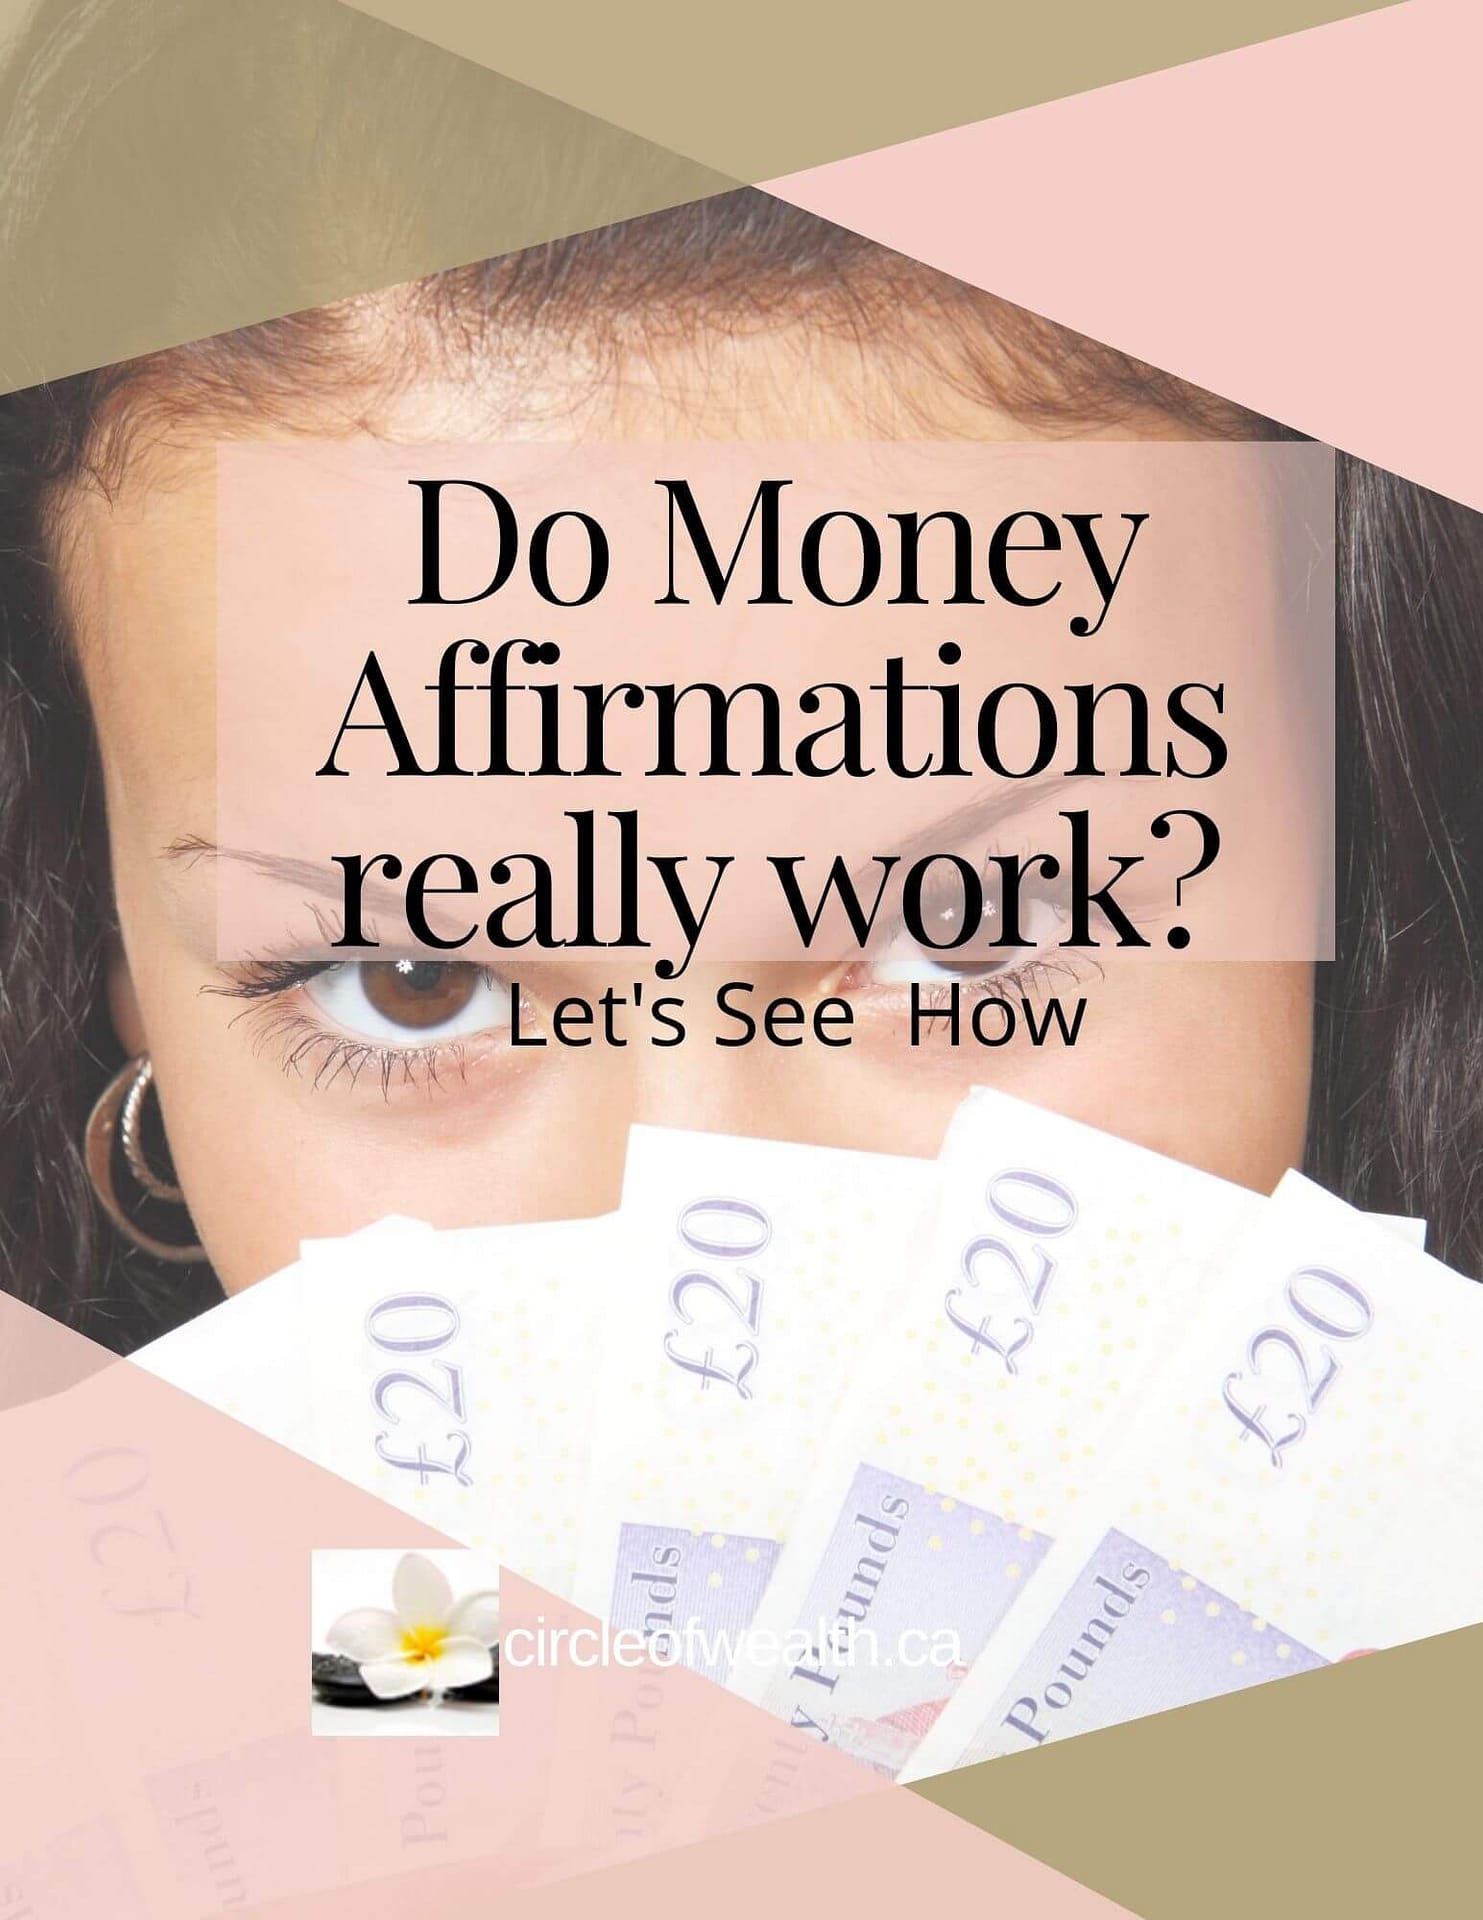 Do Money Affirmations really work?